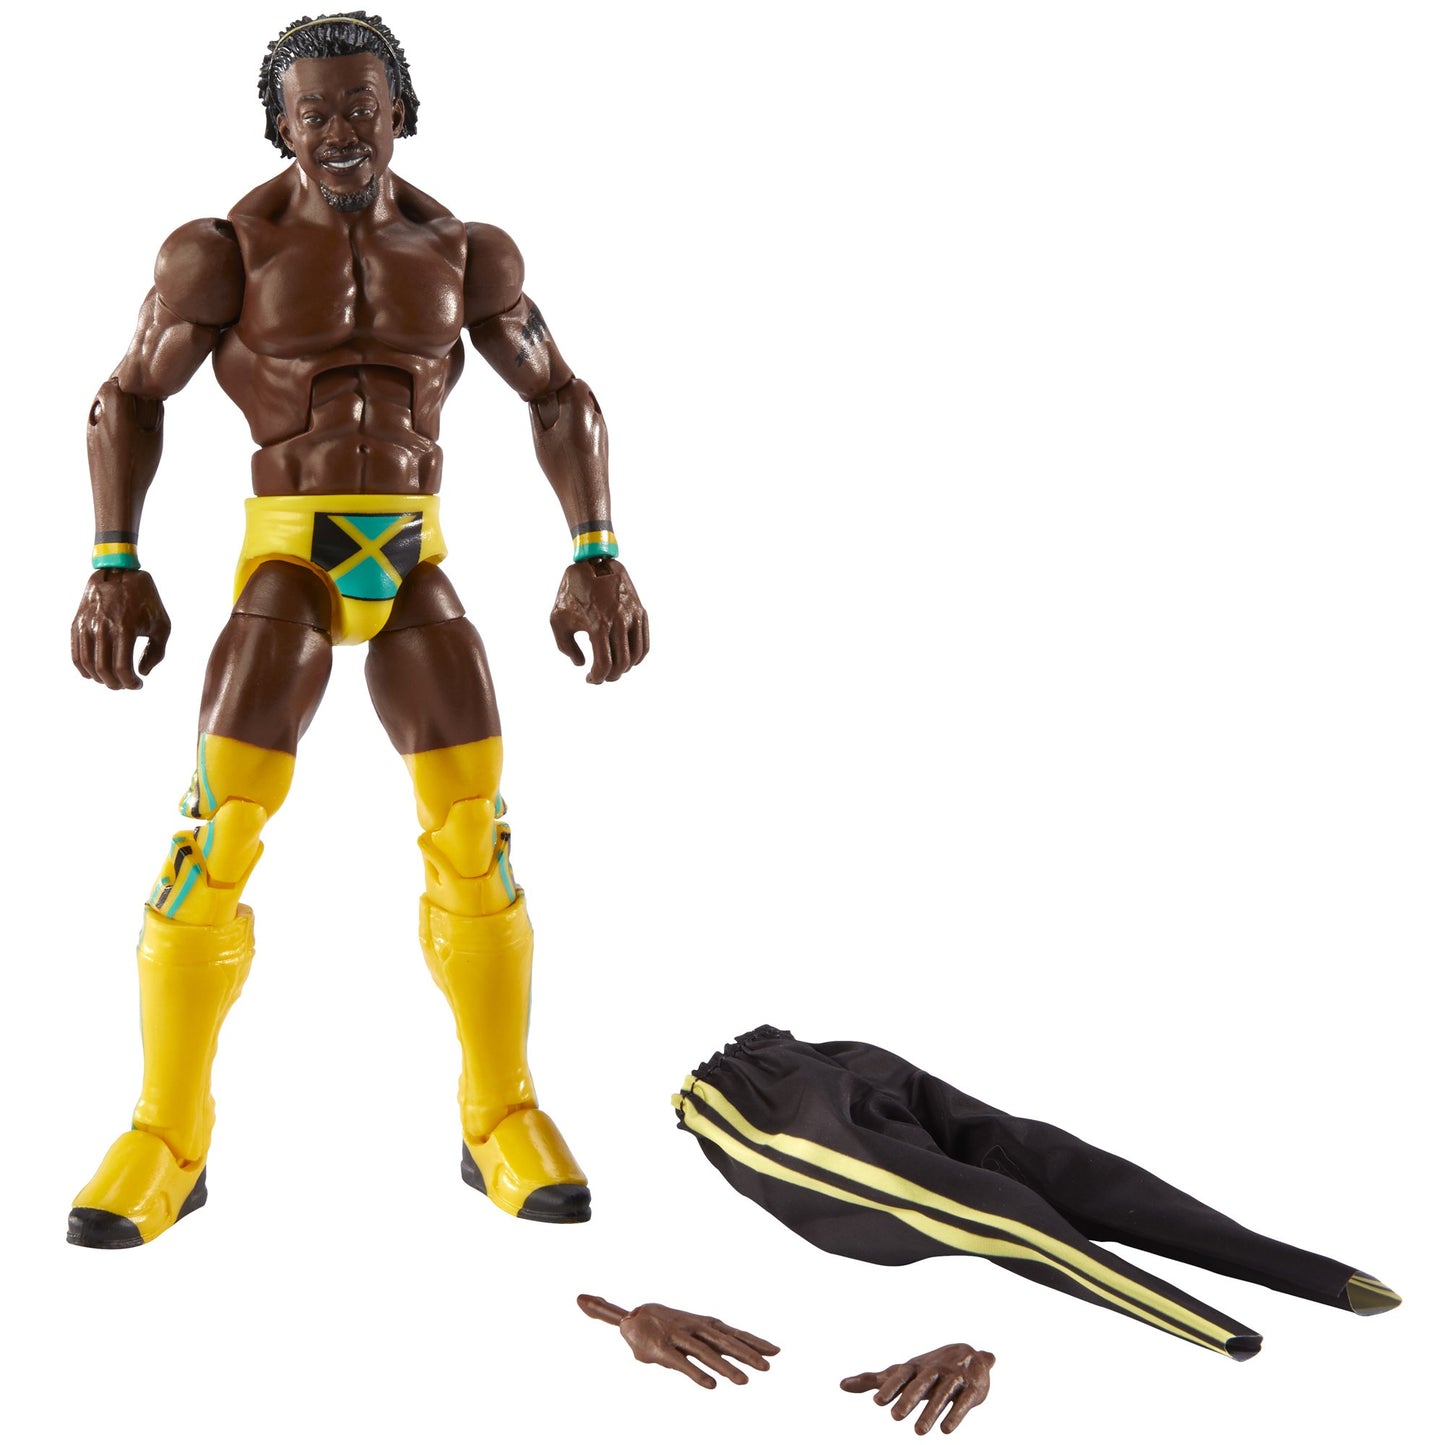 WWE Mattel Decade of Domination 2 Kofi Kingston [With Pants Off, Exclusive]